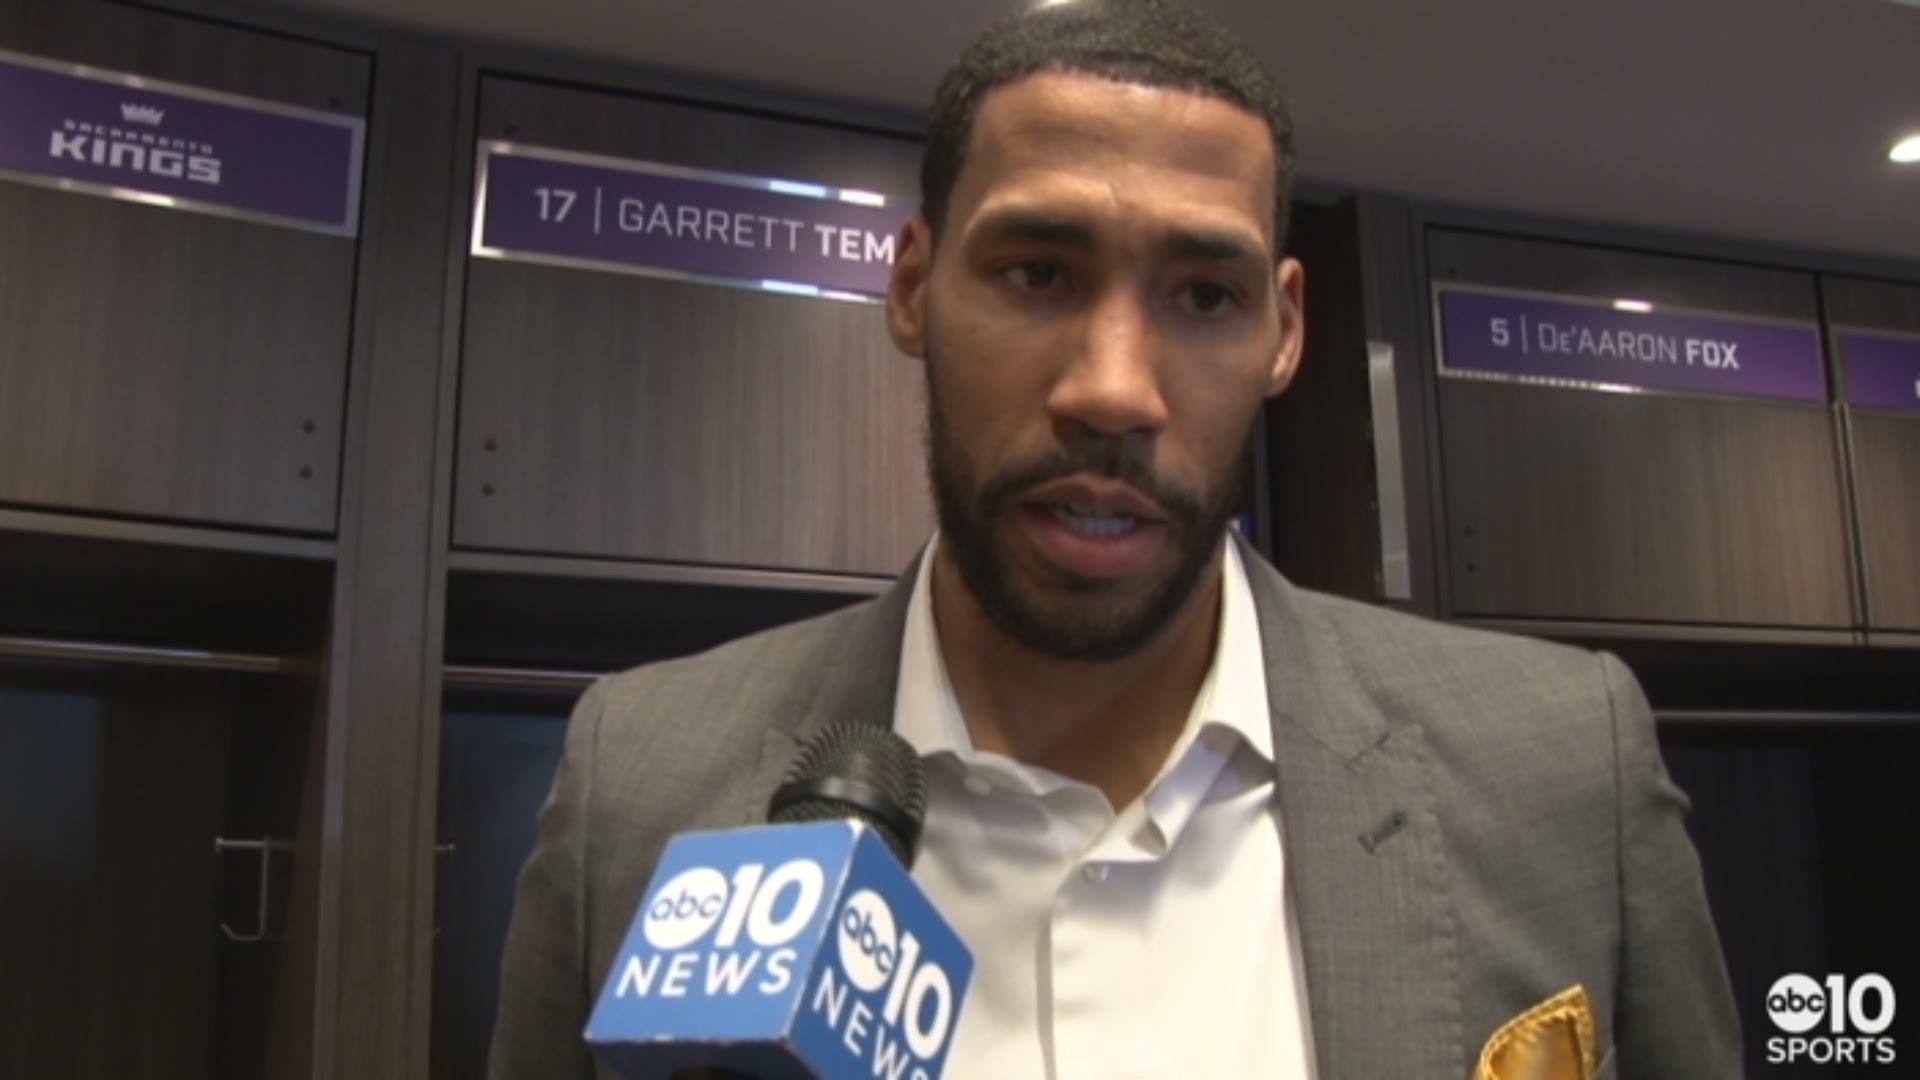 Kings forward Garrett Temple, who missed his fourth straight game due to a sprained ankle, talks about hosting a youth healing forum on Friday in the wake of the Stephon Clark police shooting, and his takeaway of the heavy police presence at Golden 1 Center before Thursday's game against the Pacers.